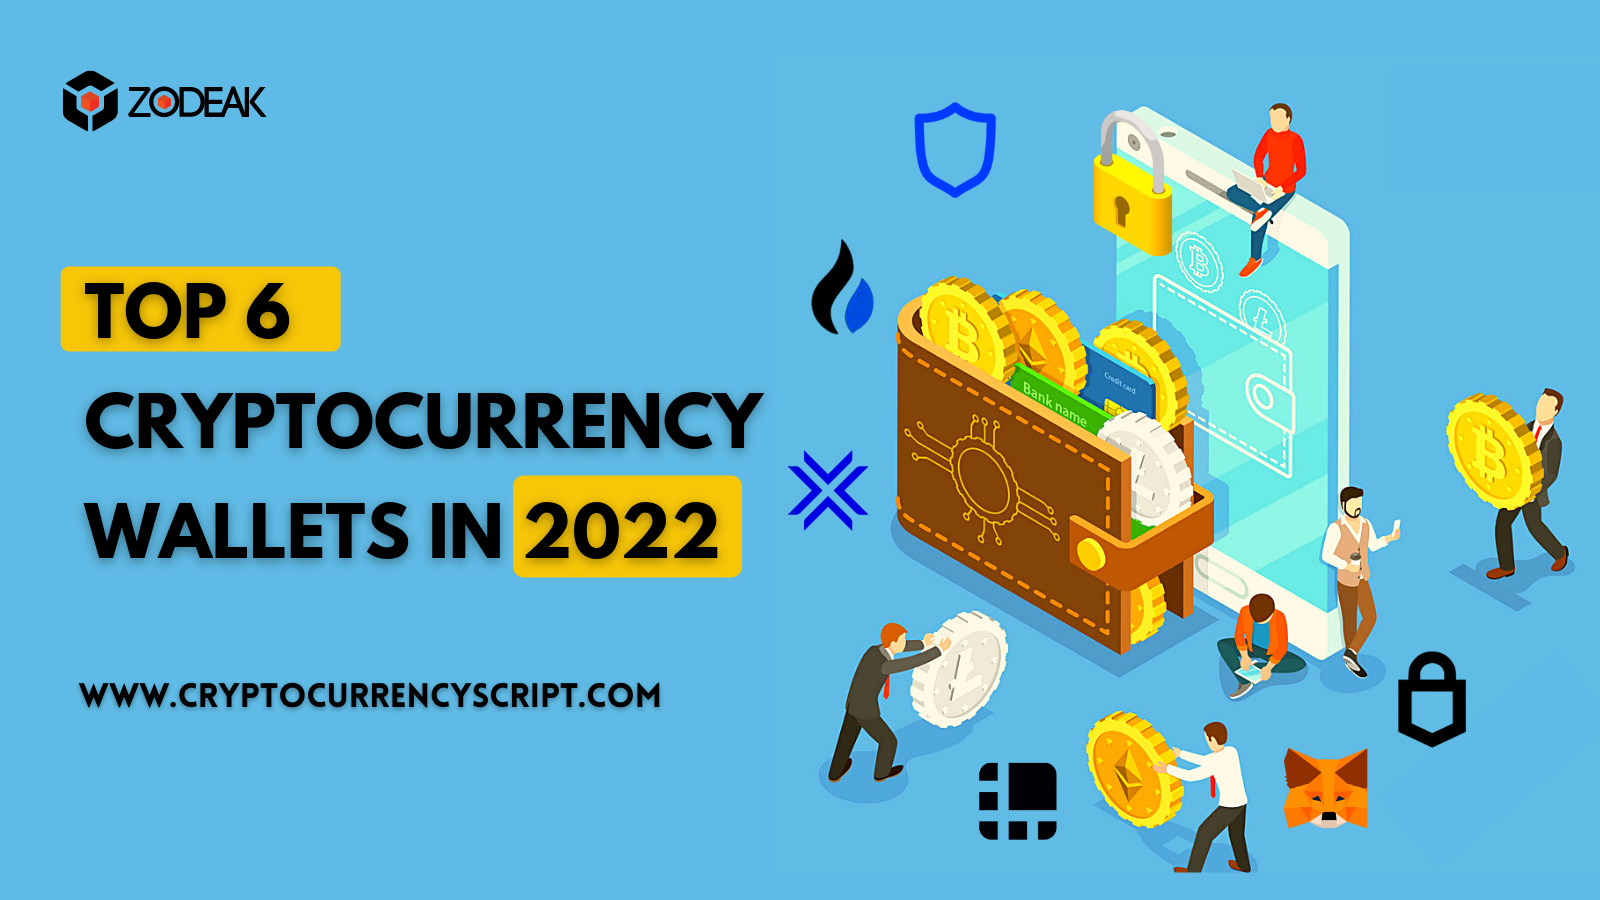 Top 6 Cryptocurrency Wallets in 2022